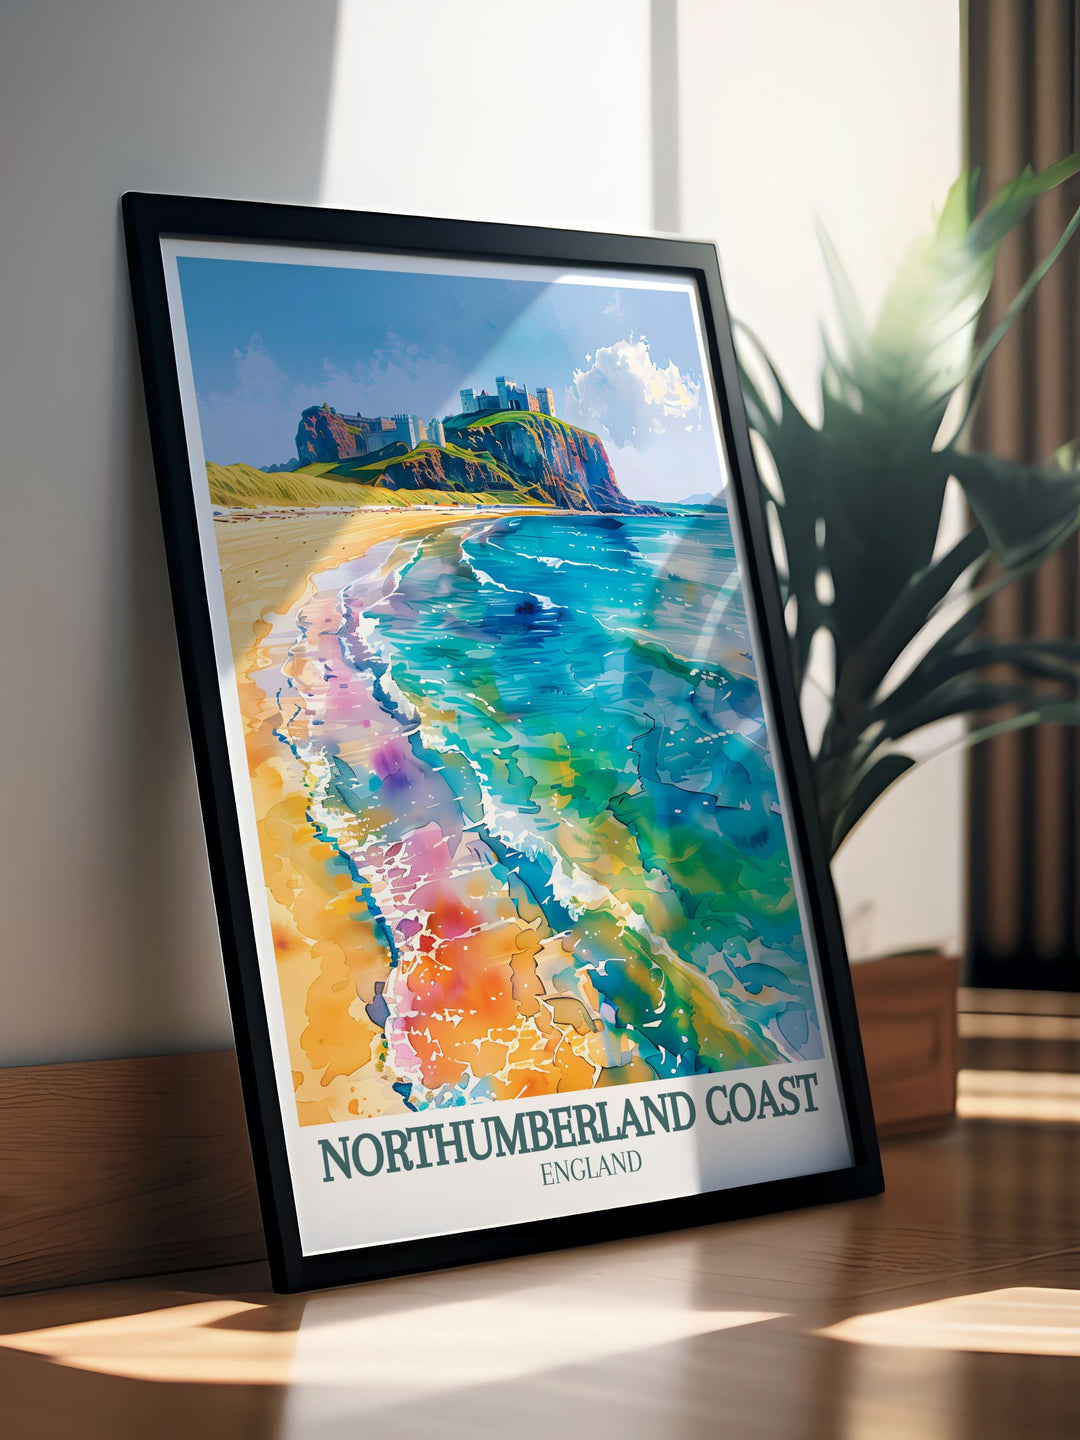 Vintage Travel Print showcasing the majestic Bamburgh Castle and Dunstanburgh Castle on the scenic Northumberland Coast ideal for adding a touch of history and charm to any room with vibrant colors and intricate details